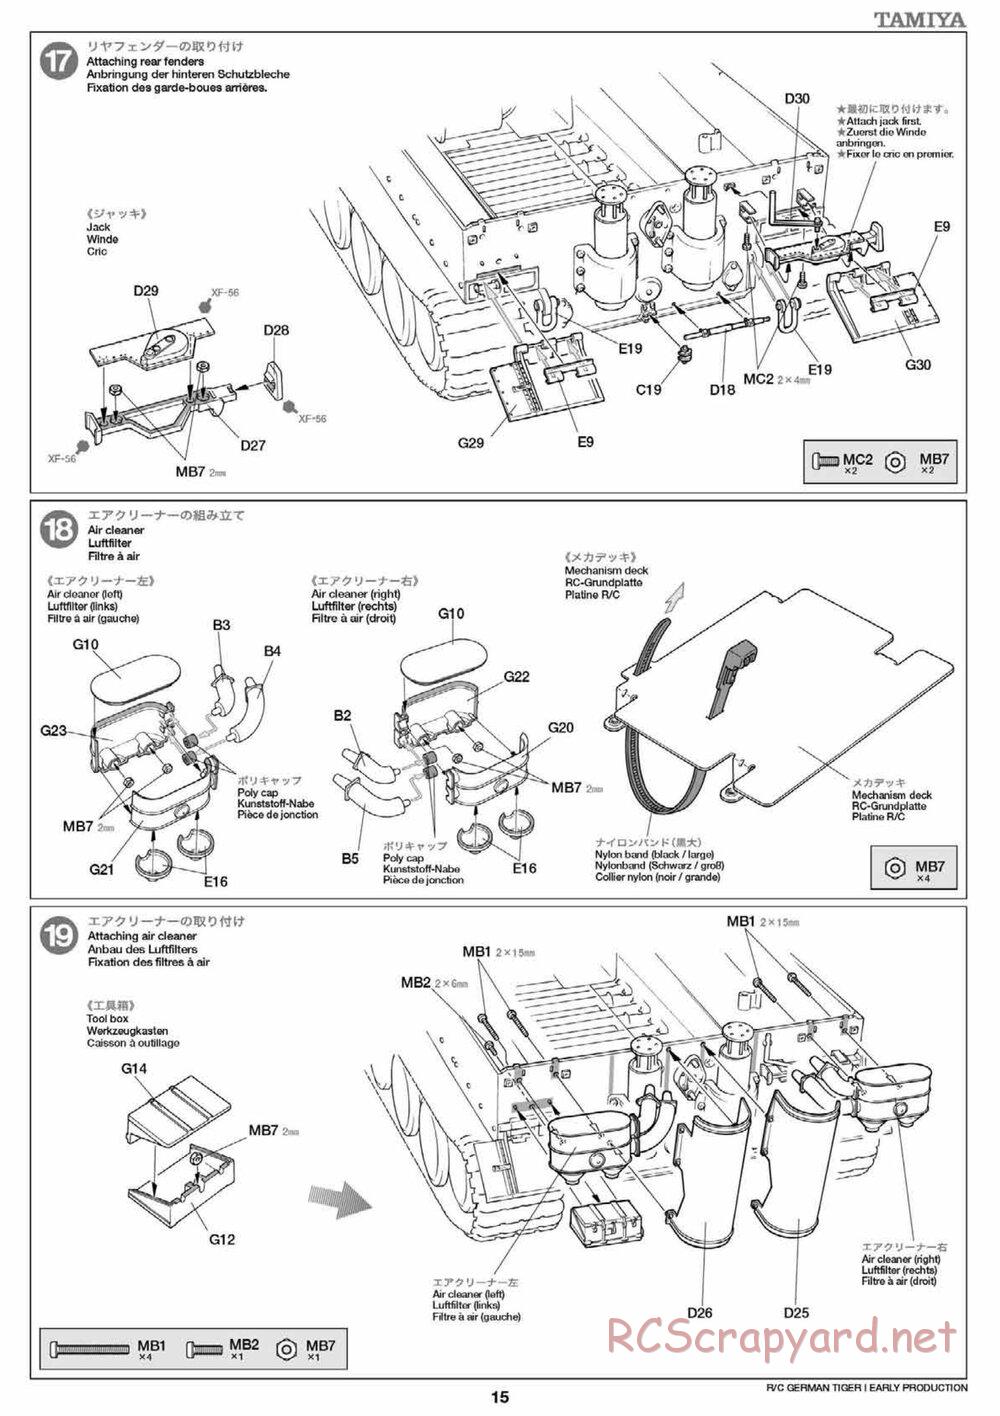 Tamiya - Tiger I Early Production - 1/16 Scale Chassis - Manual - Page 15